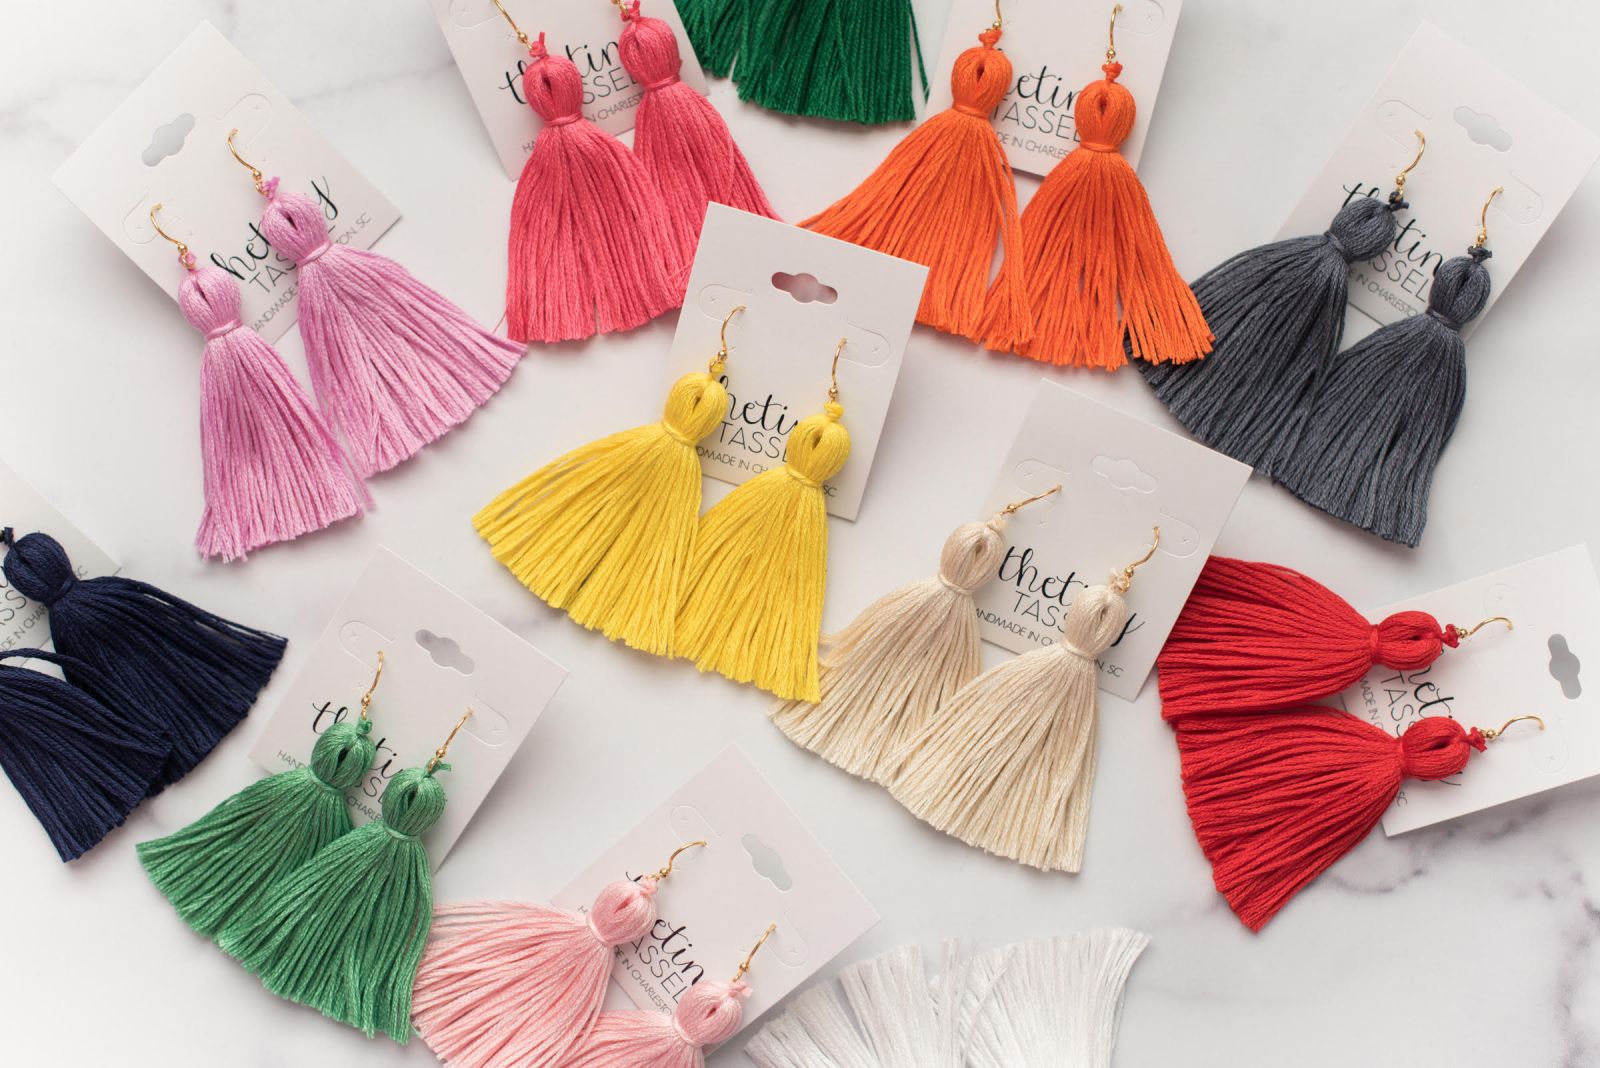 Tiny Tassel opened in 2015 with a line of handmade jewelry. The company's business has grown 1,000% this year. (Photo/Provided)